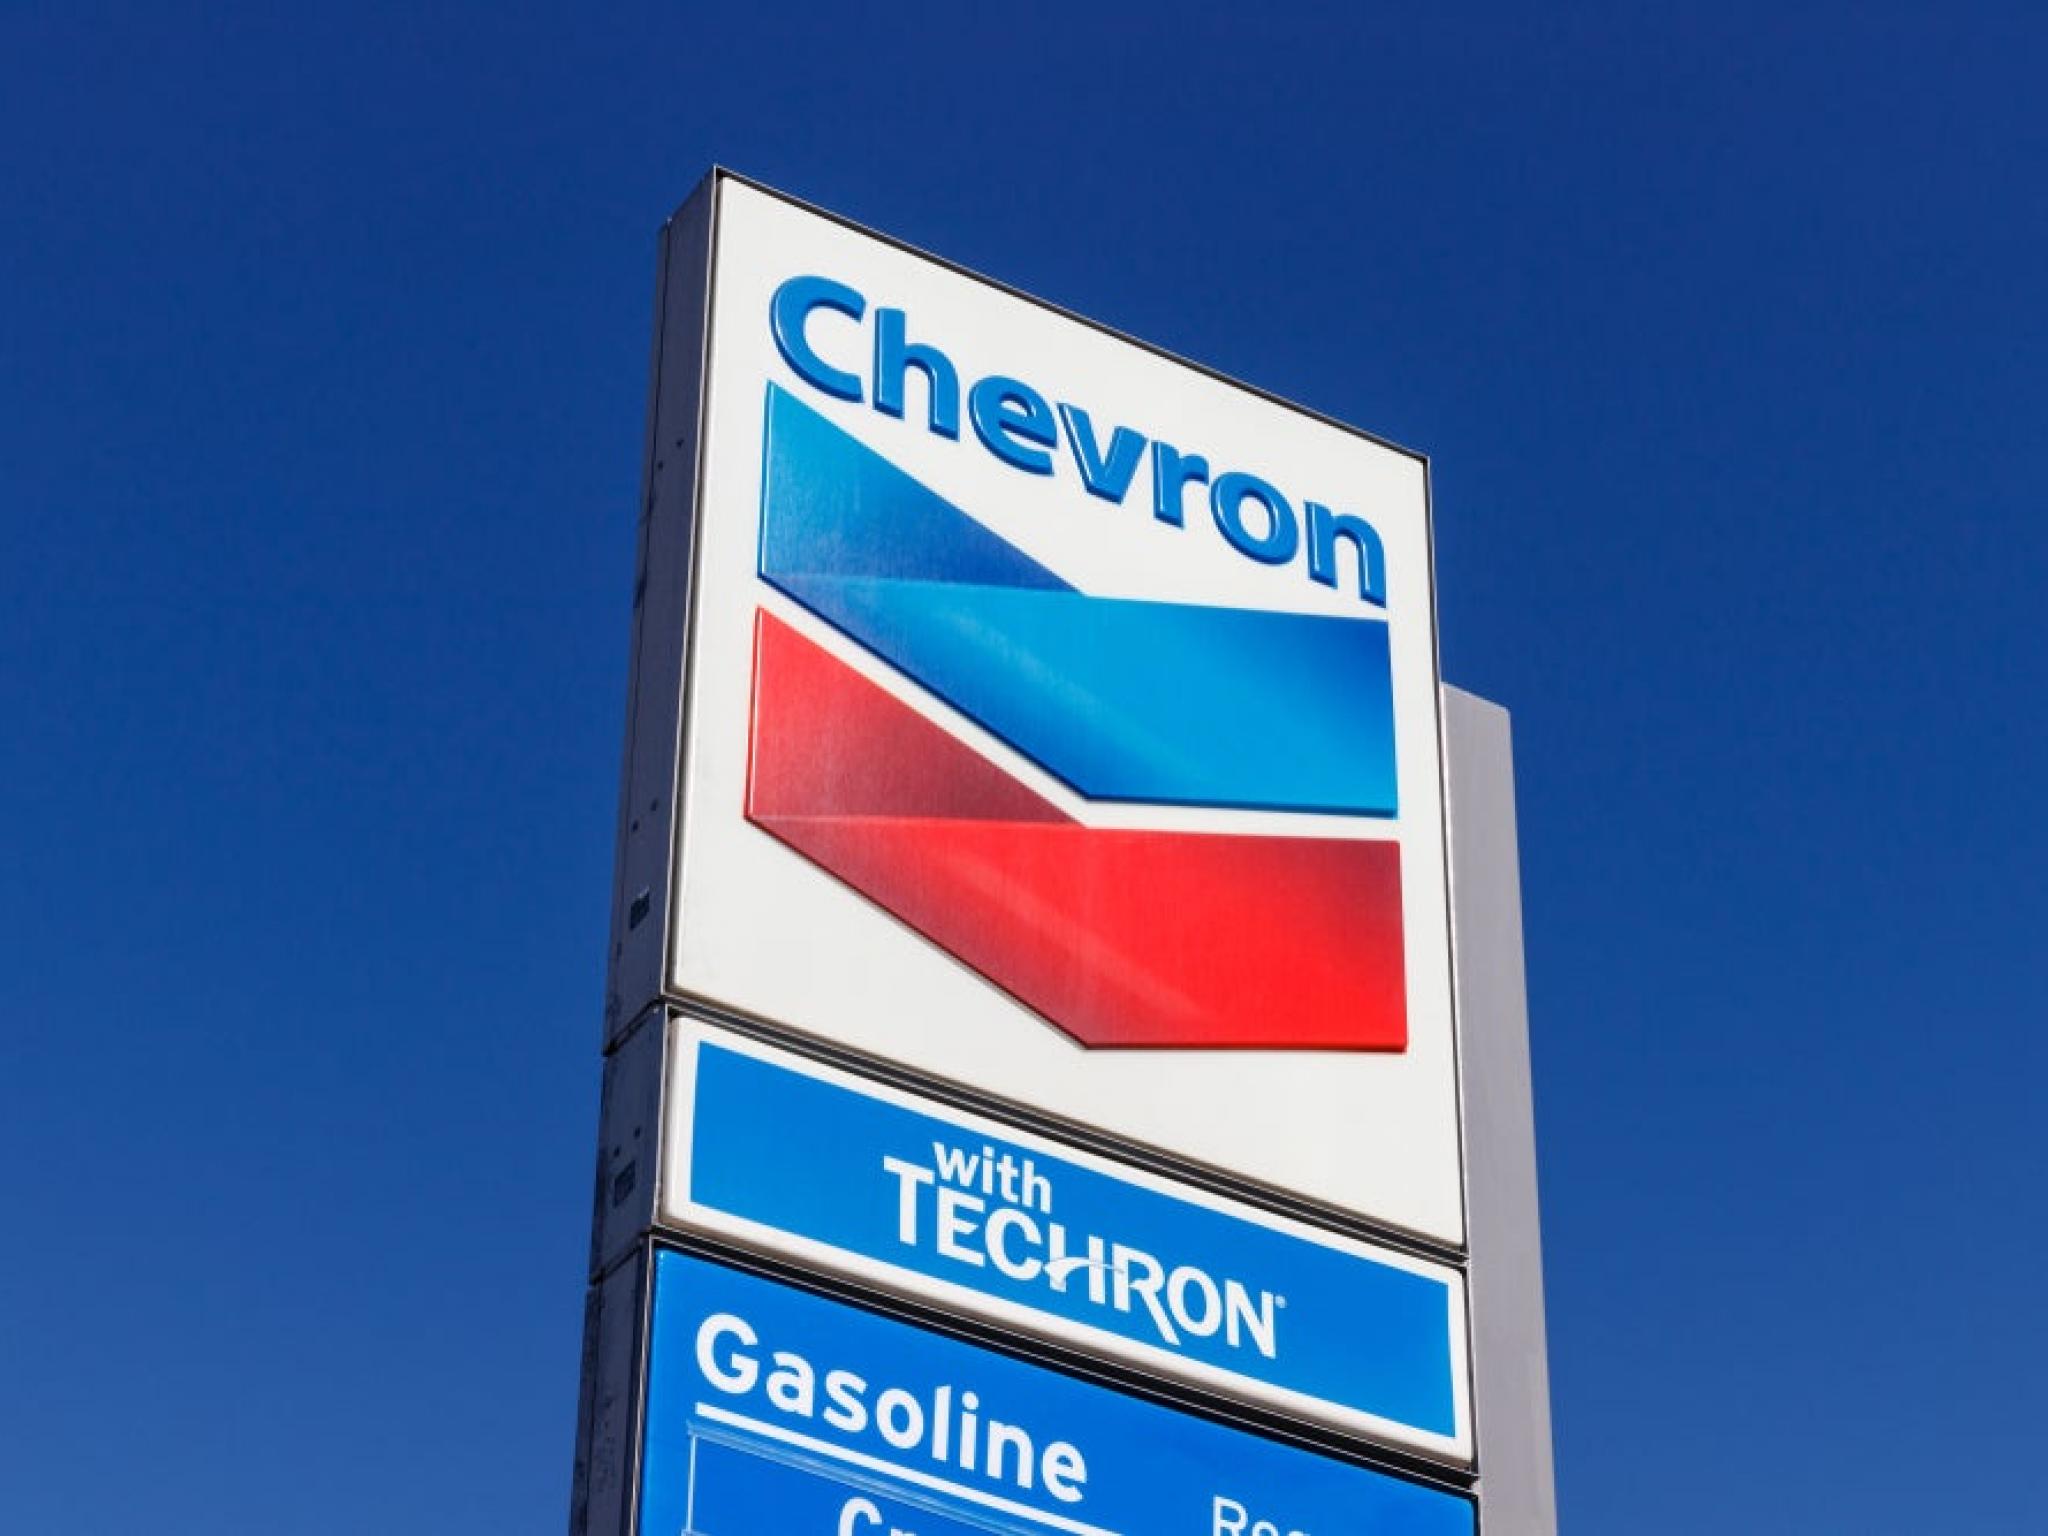  chevrons-53b-hess-deal-faces-uncertainty-amid-exxon-and-cnooc-arbitration-claims 